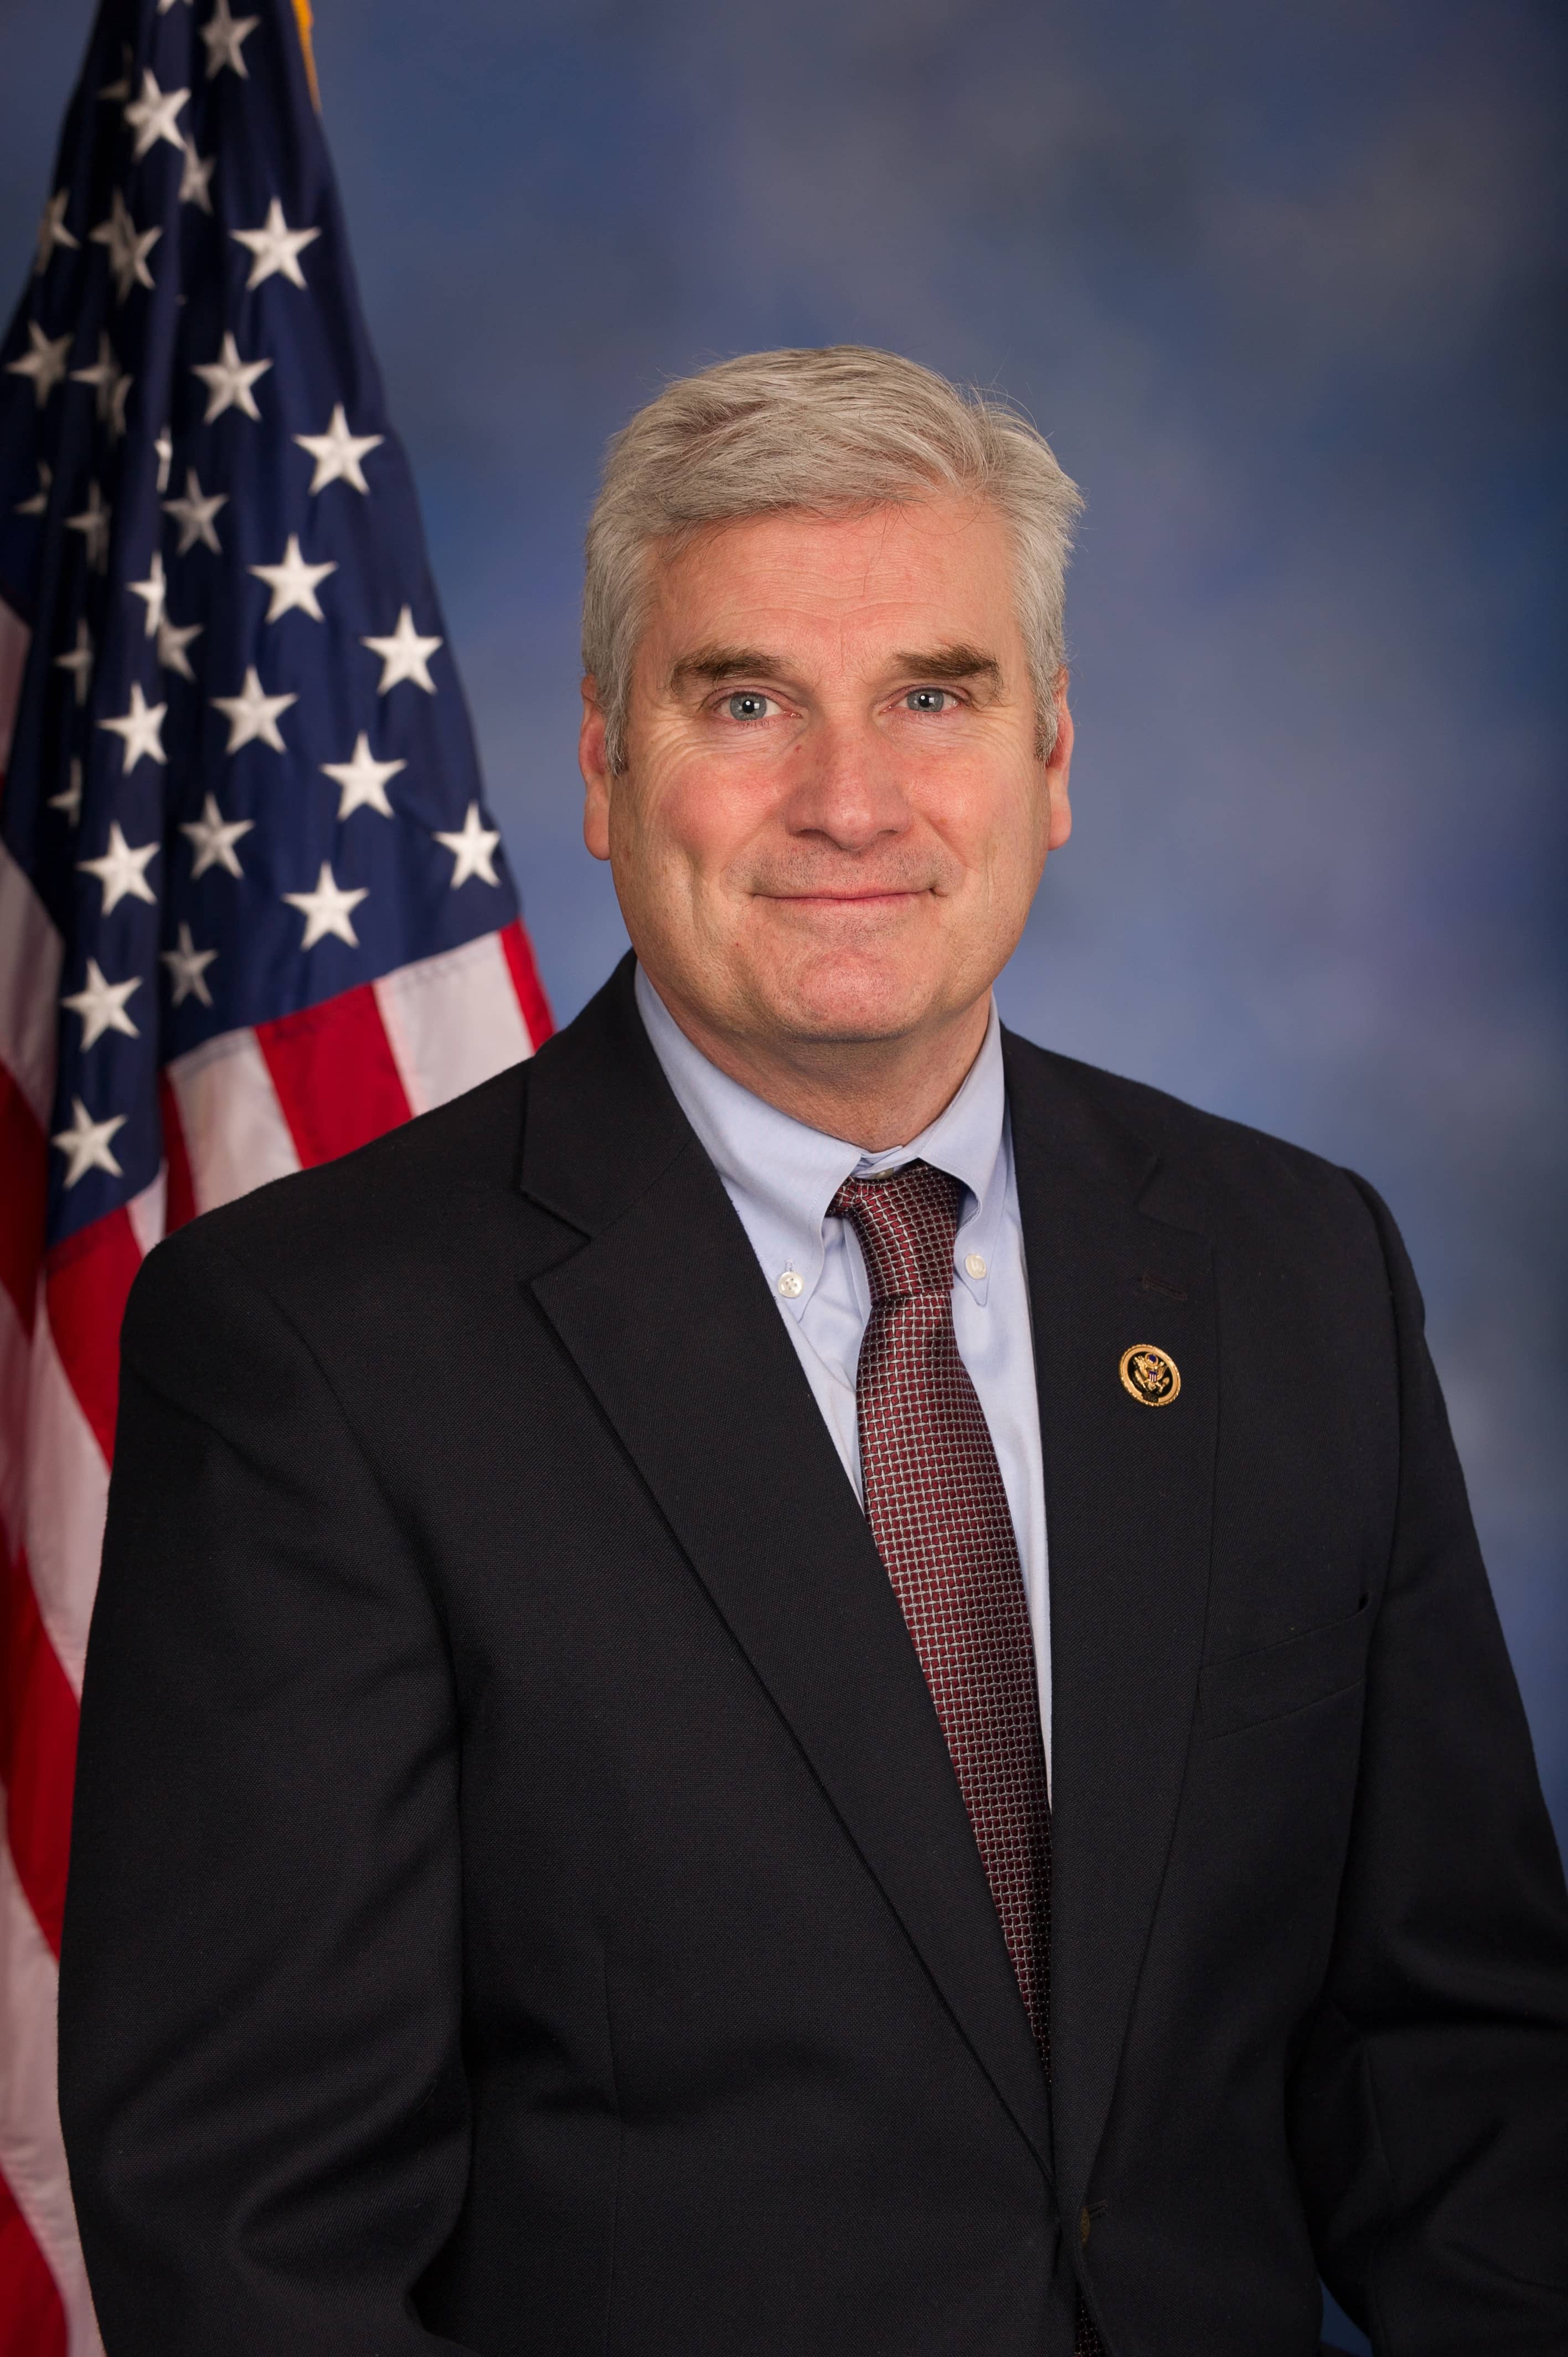 Image of Tom Emmer, U.S. House of Representatives, Republican Party